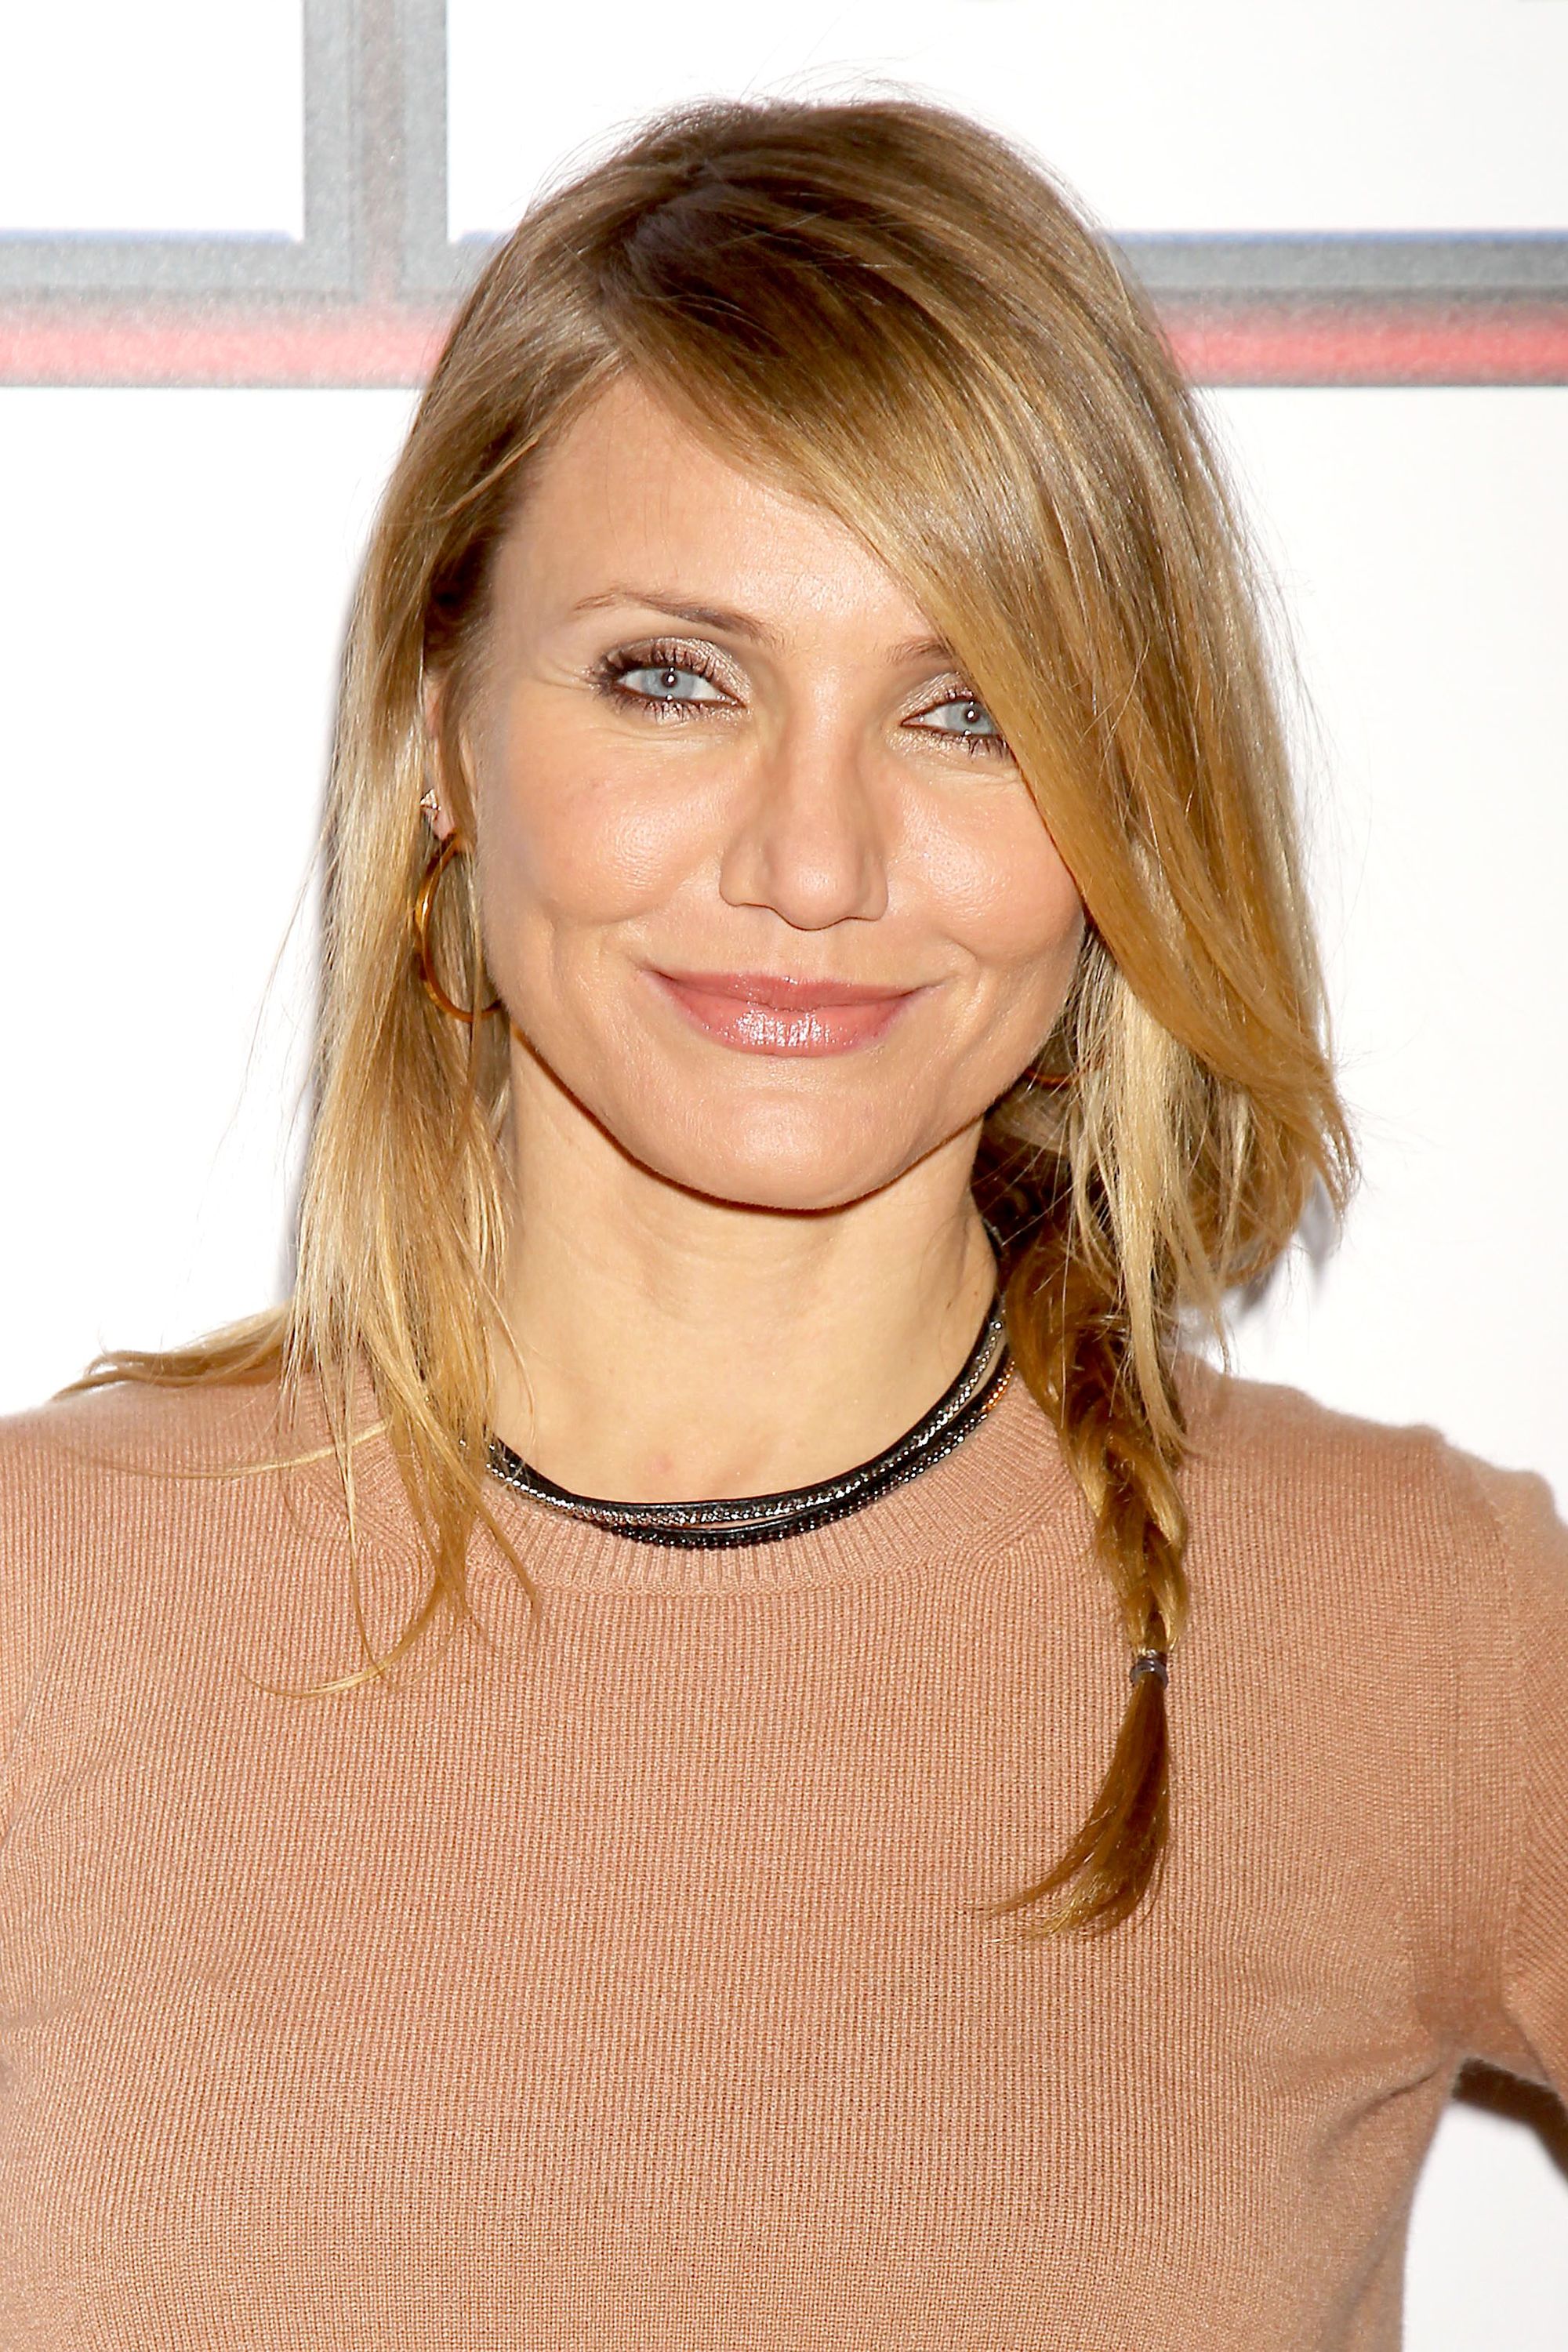 actress cameron diaz on the red carpet with her hair in a side braid with long side bangs